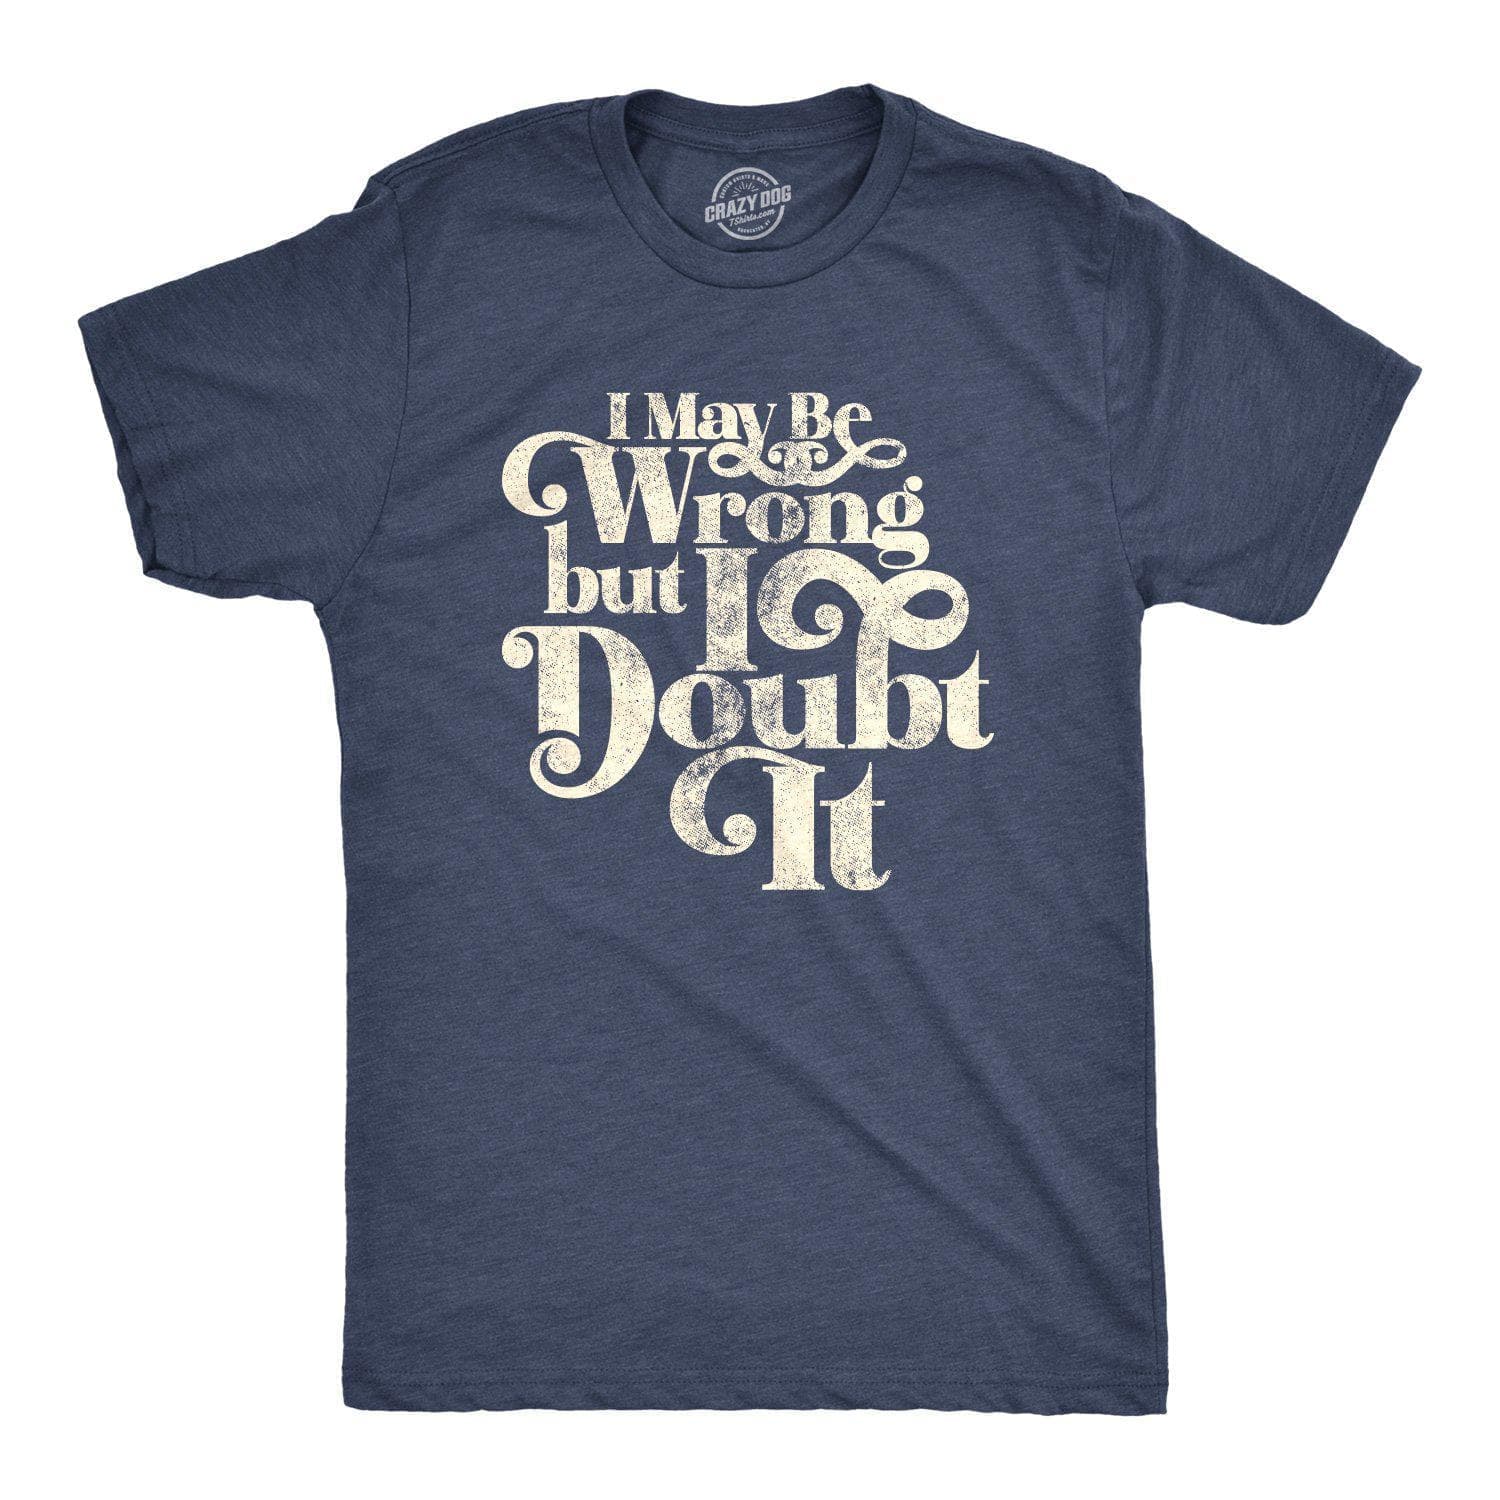 I May Be Wrong But I Doubt It Men's Tshirt  -  Crazy Dog T-Shirts